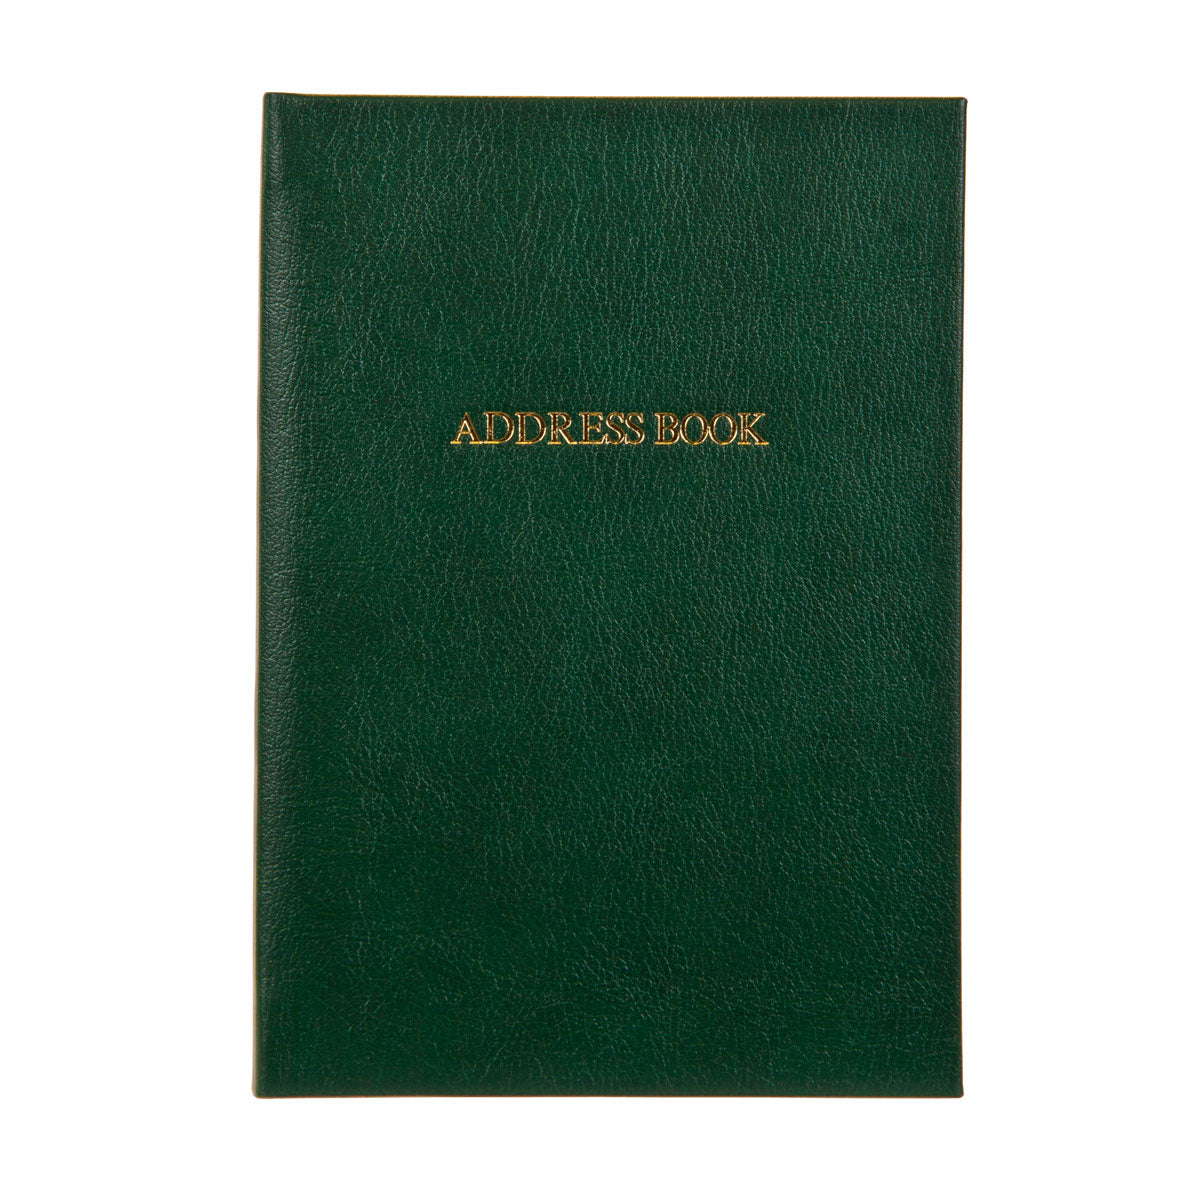 Green Leather Address book with gold embossed title